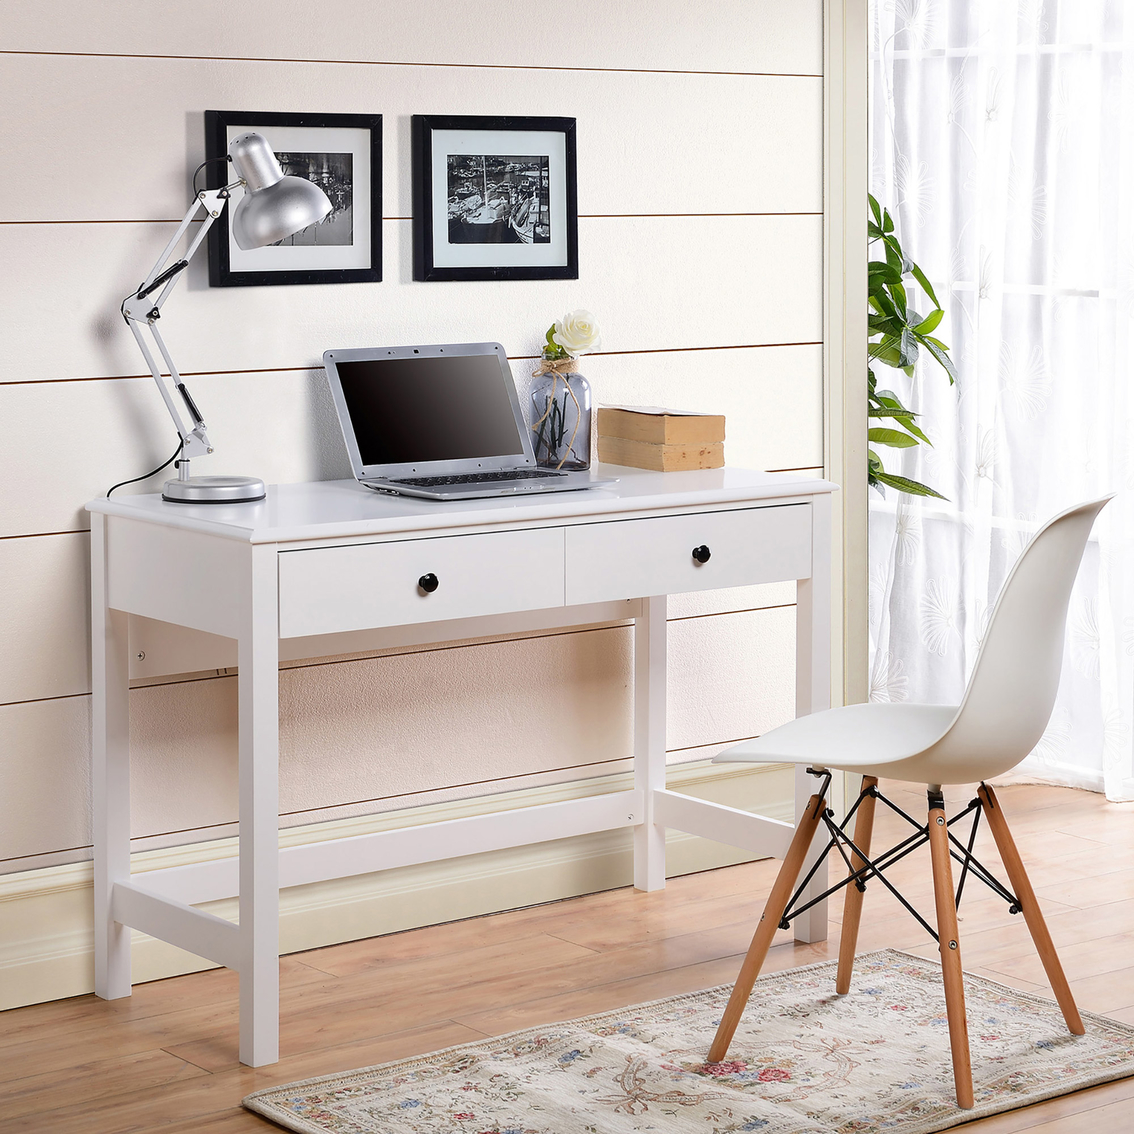 Signature Design by Ashley Othello Home Office Small Desk - Image 6 of 7